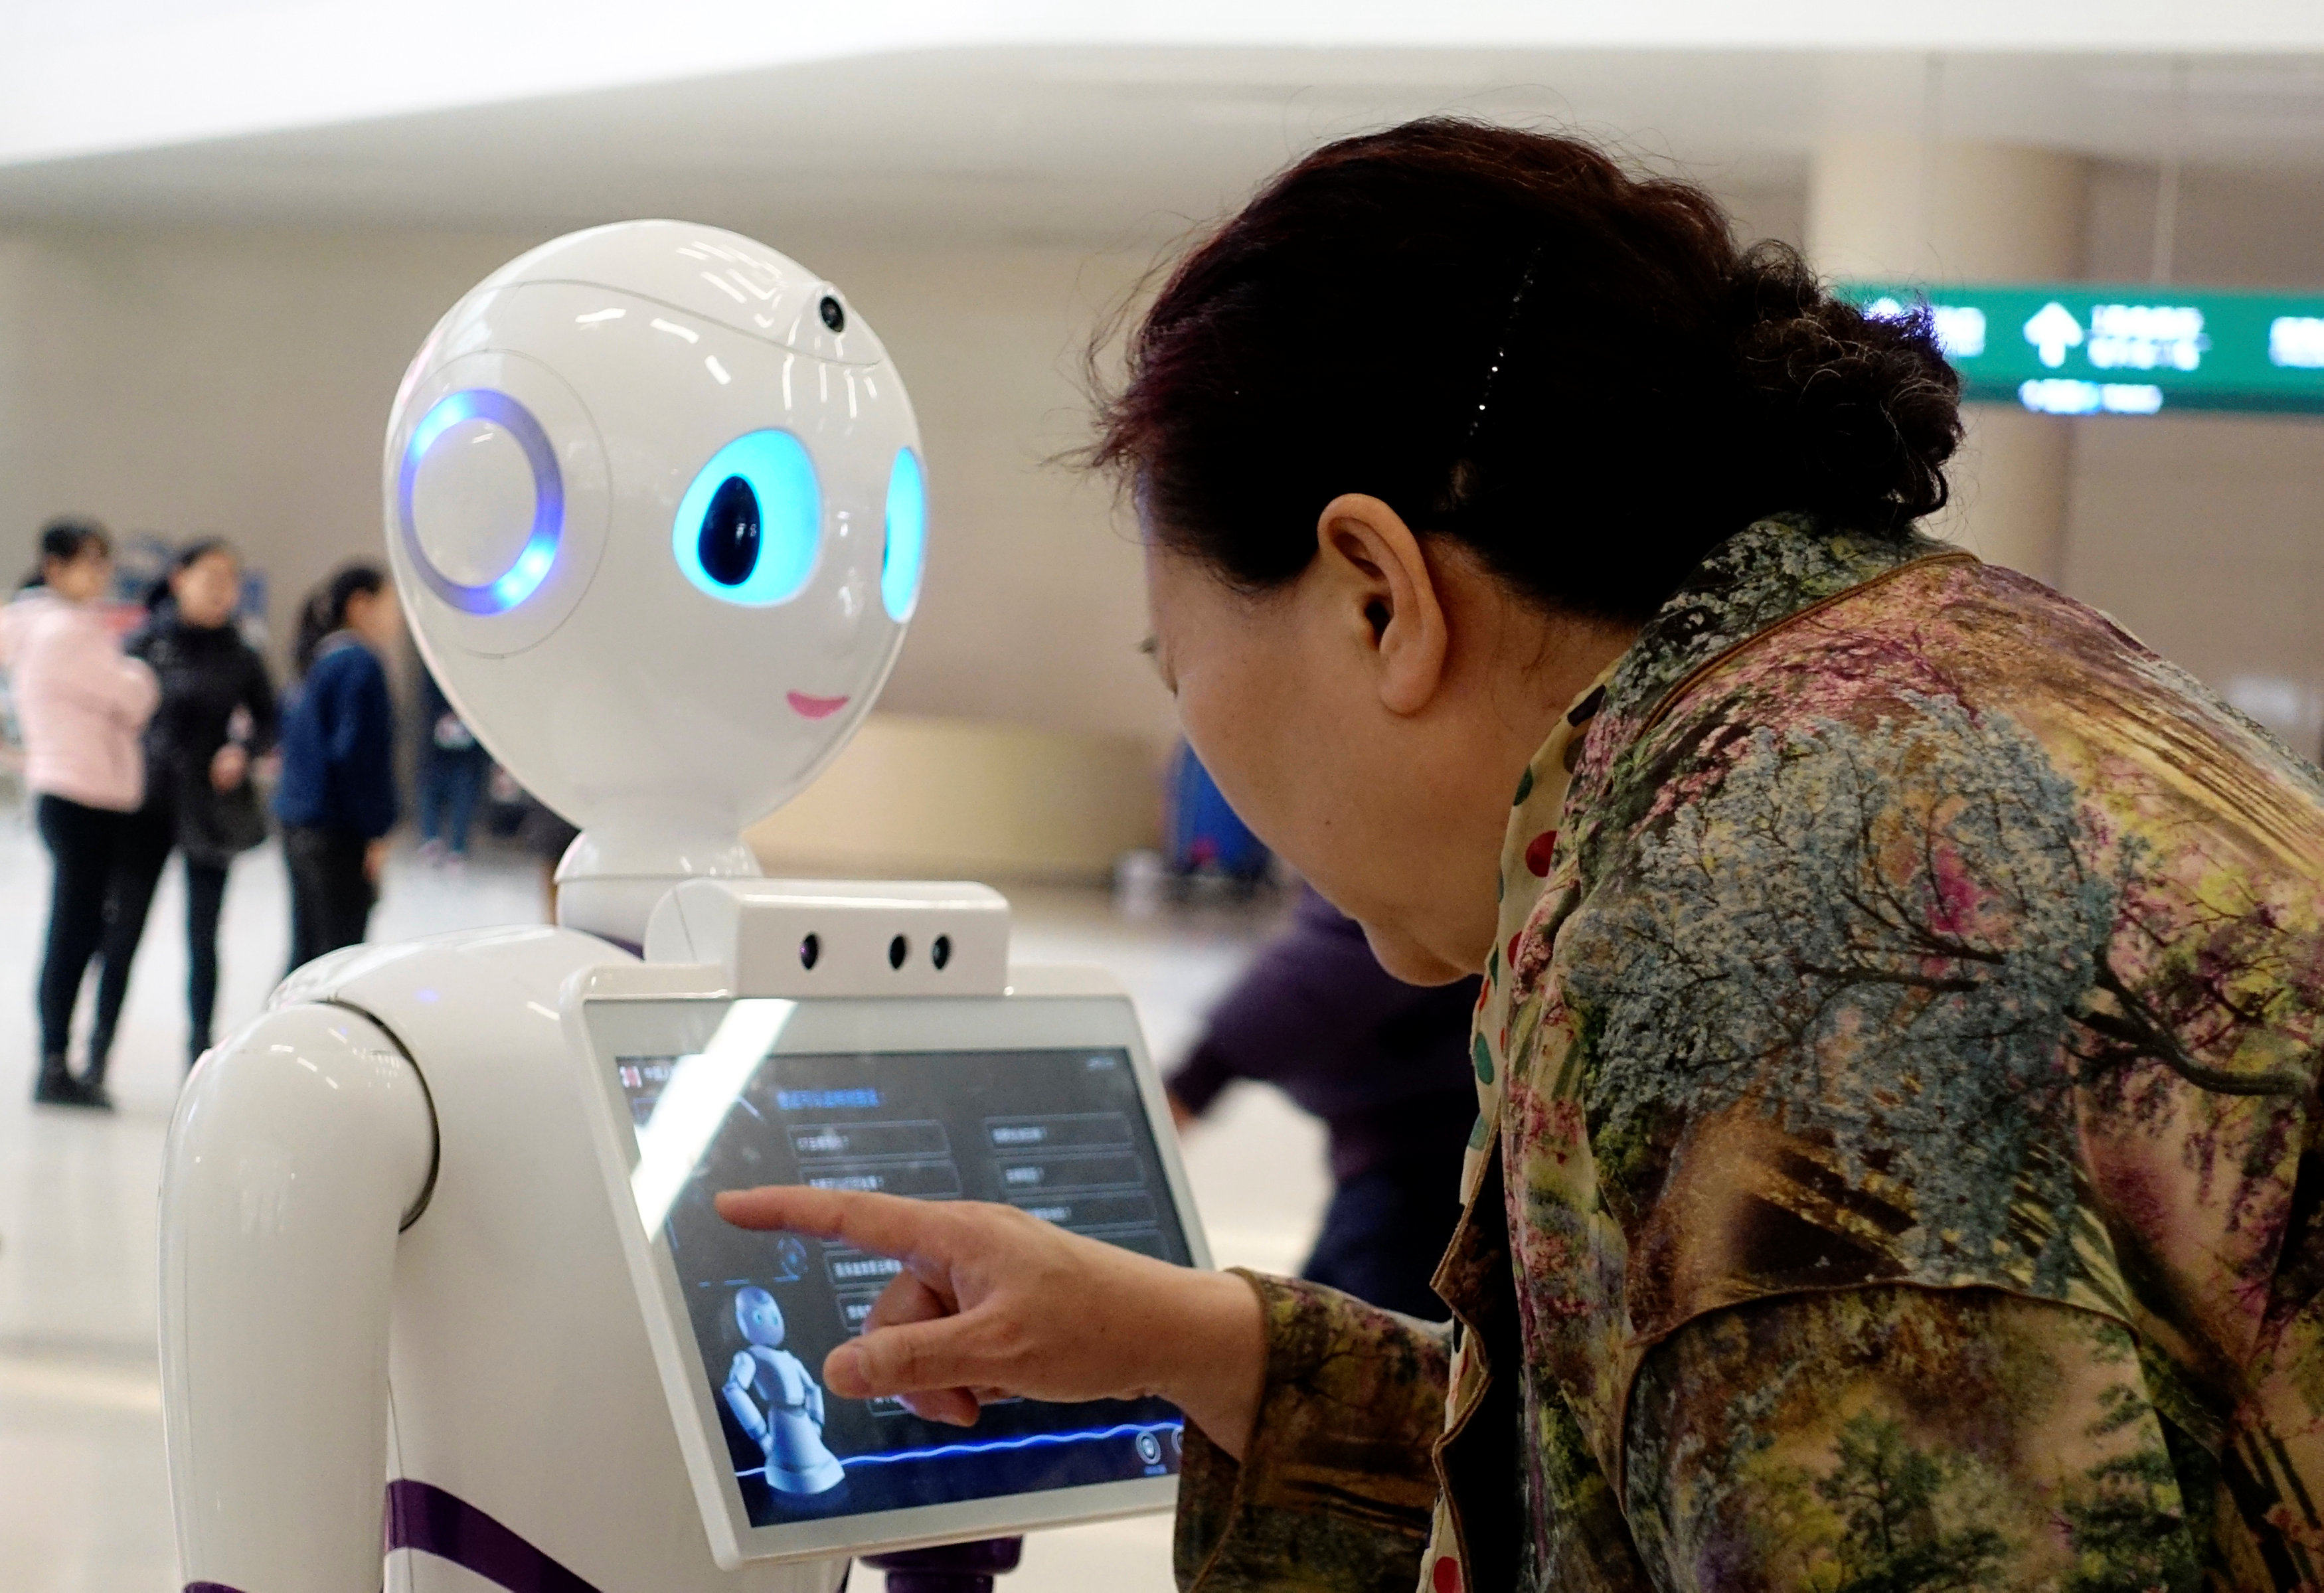 A woman touches a screen on a robot at the outpatient hall of People’s Liberation Army General Hospital in Beijing, China, on March 16, 2017. Photo: Reuters